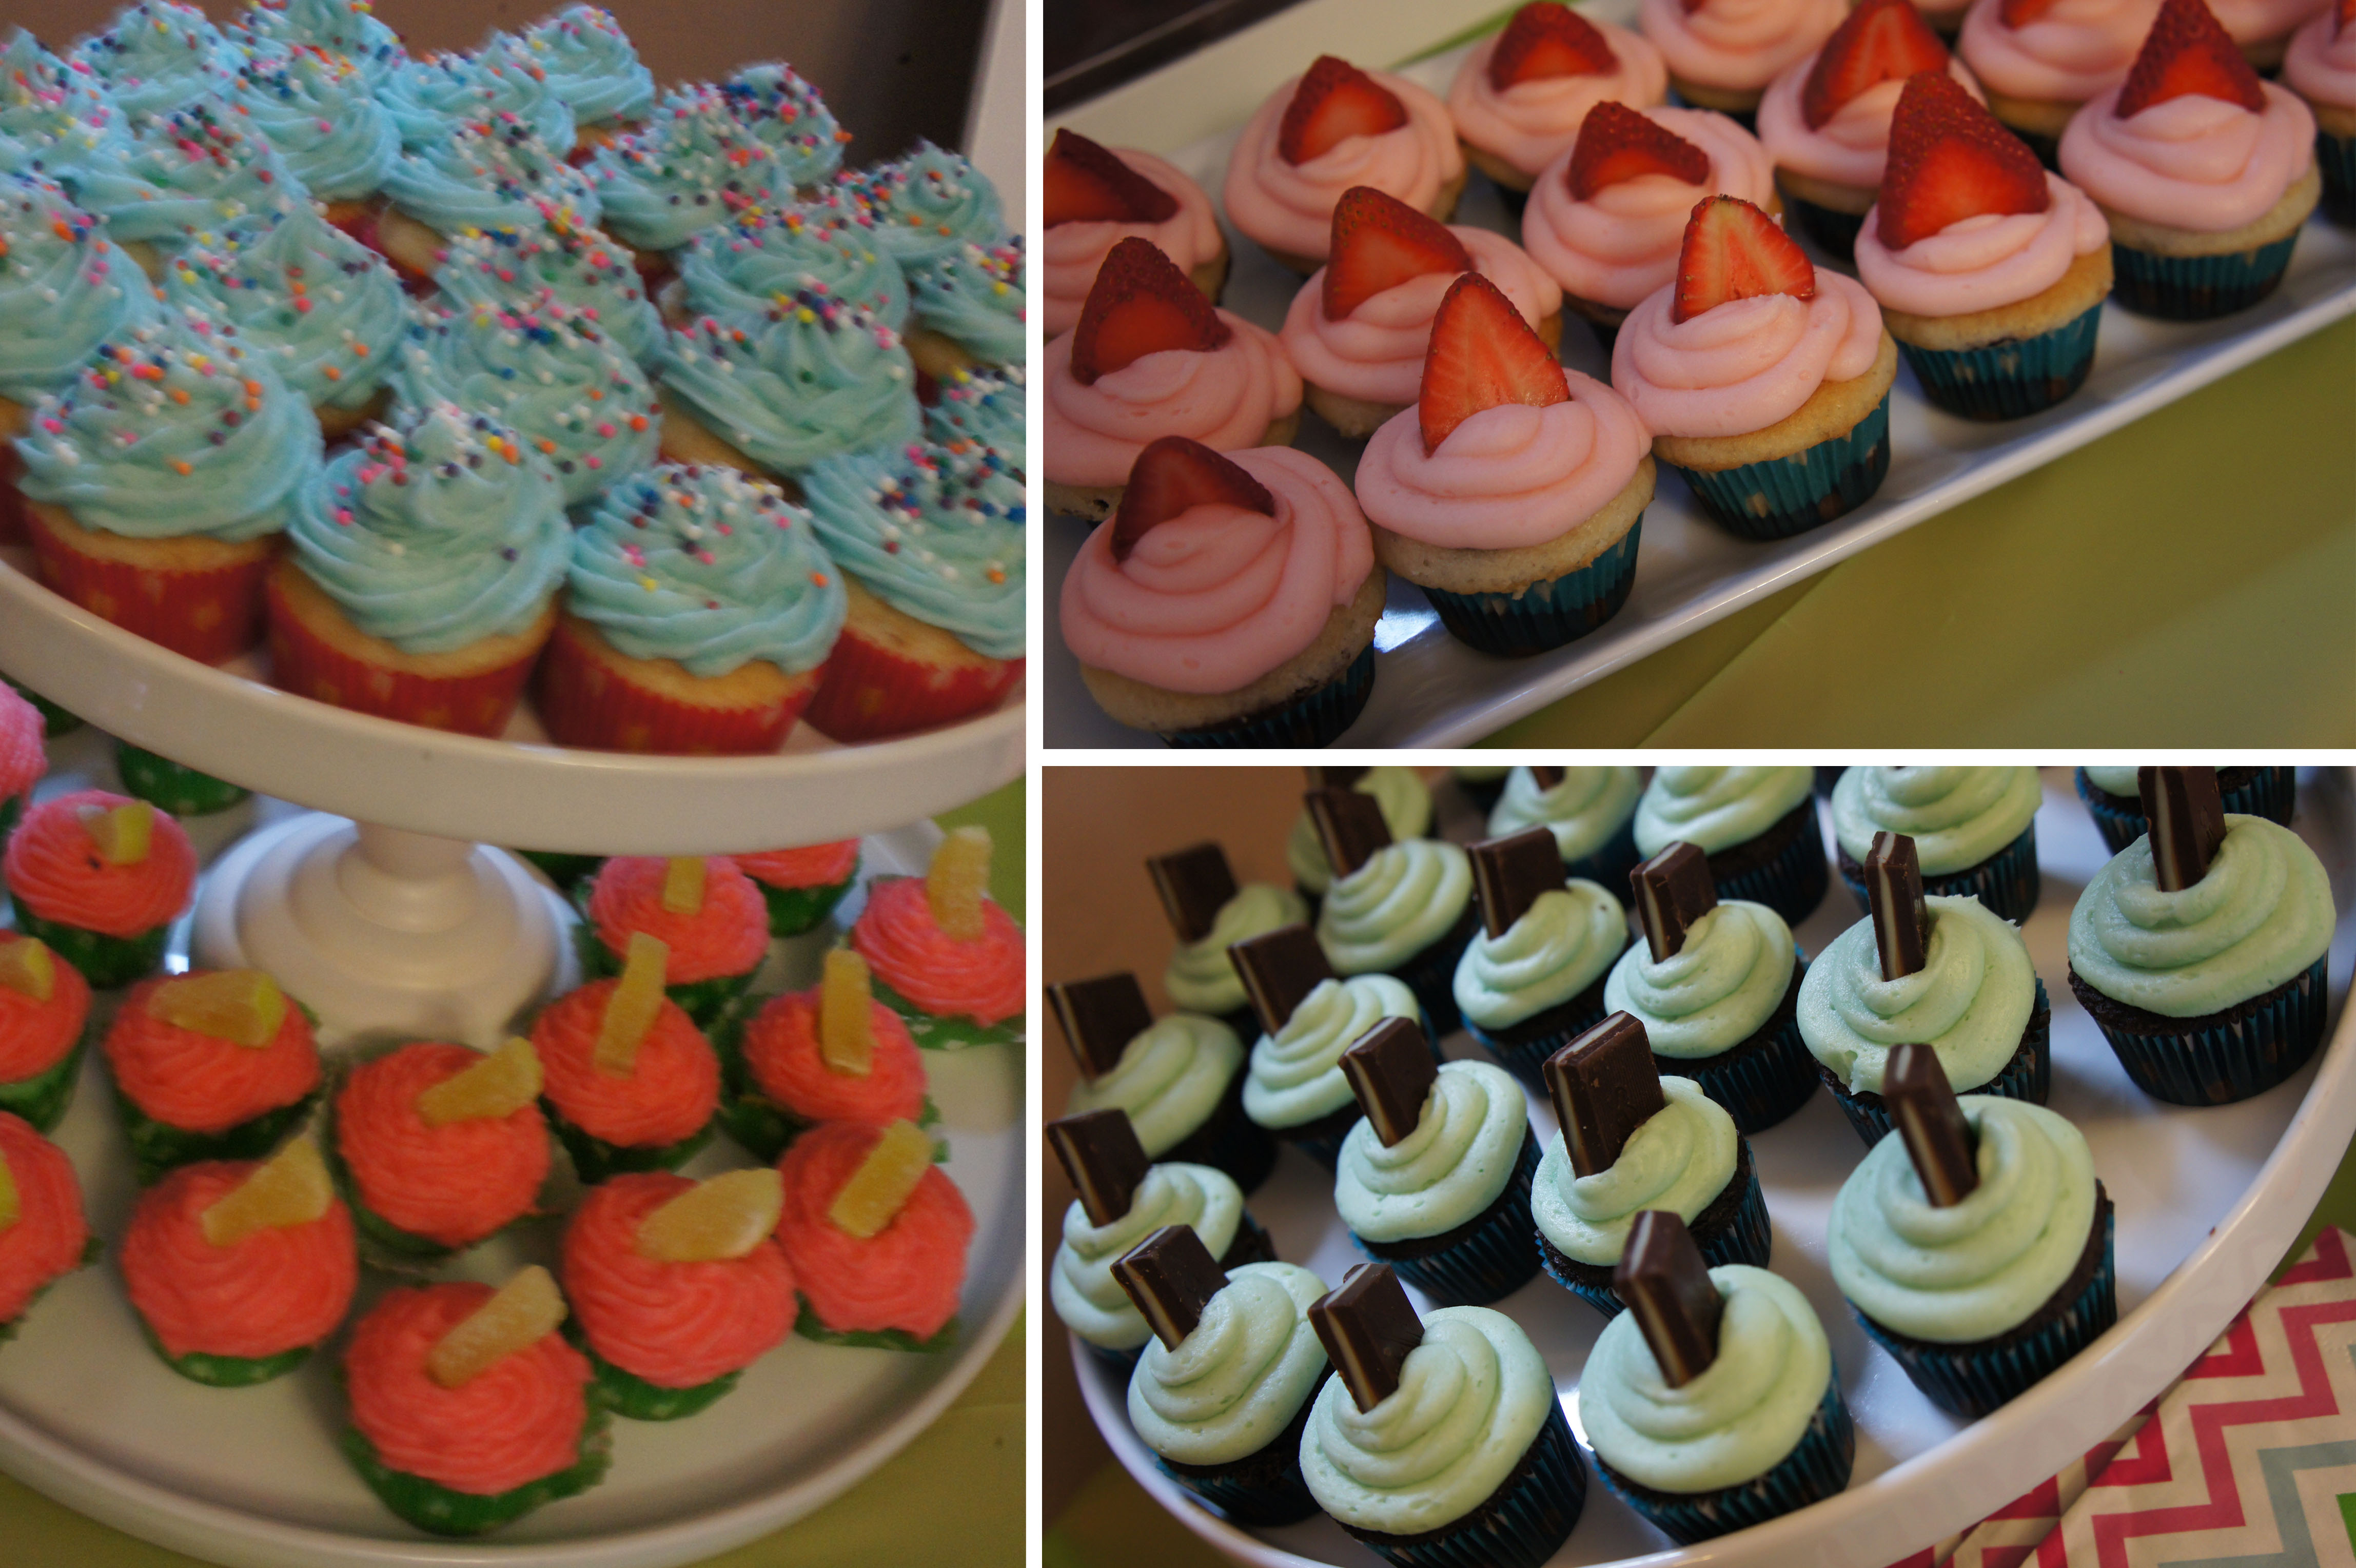 all cupcakes